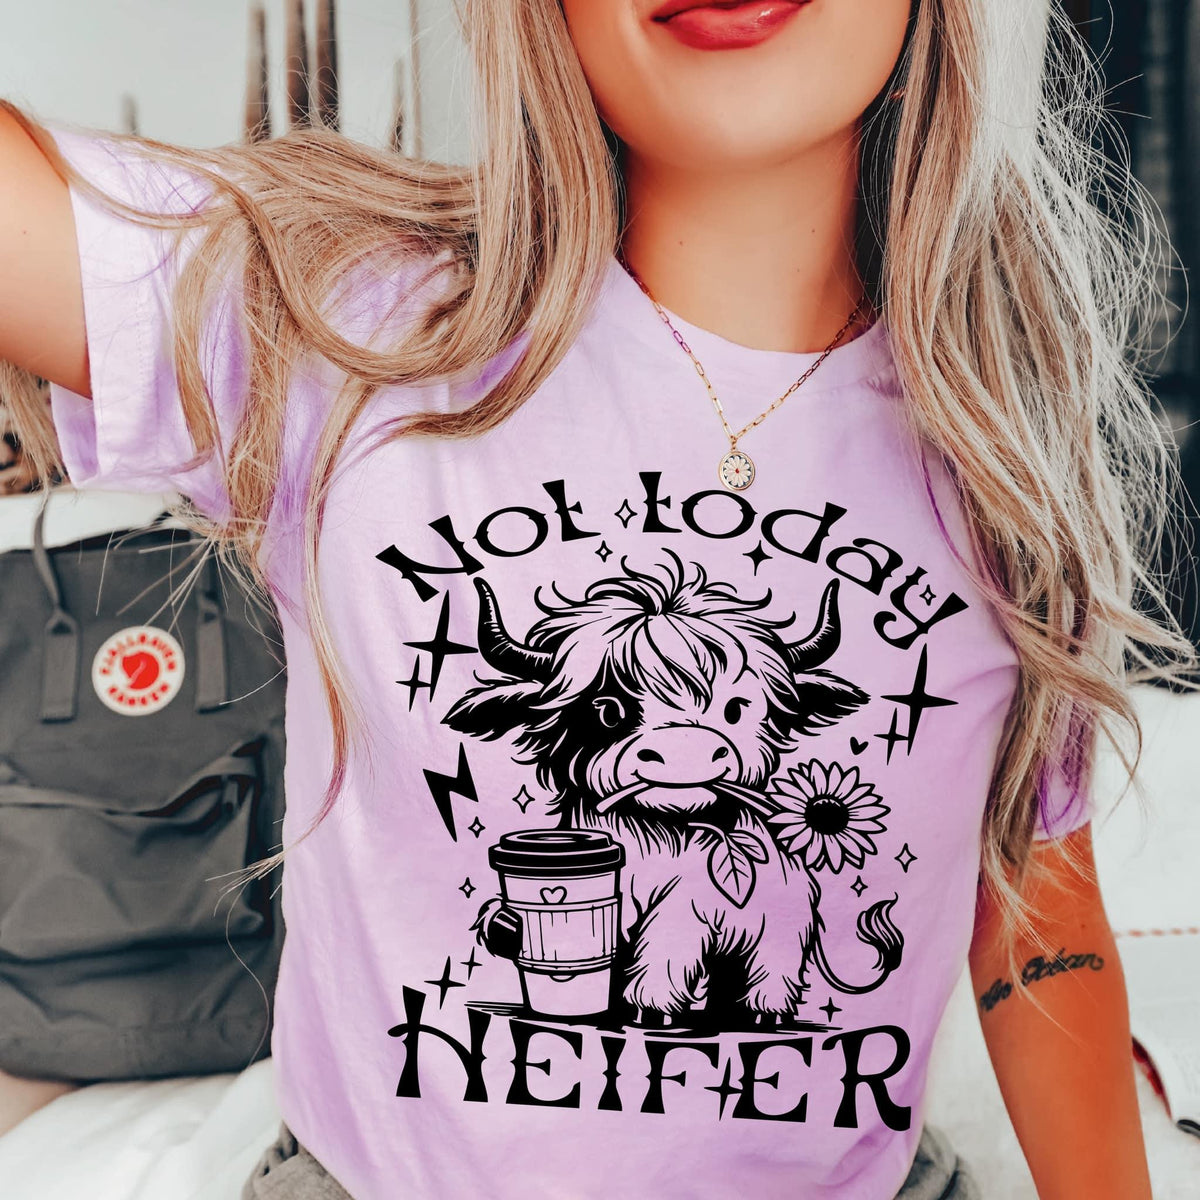 Not Today Heifer Graphic Tee with color options - Ash Boutique